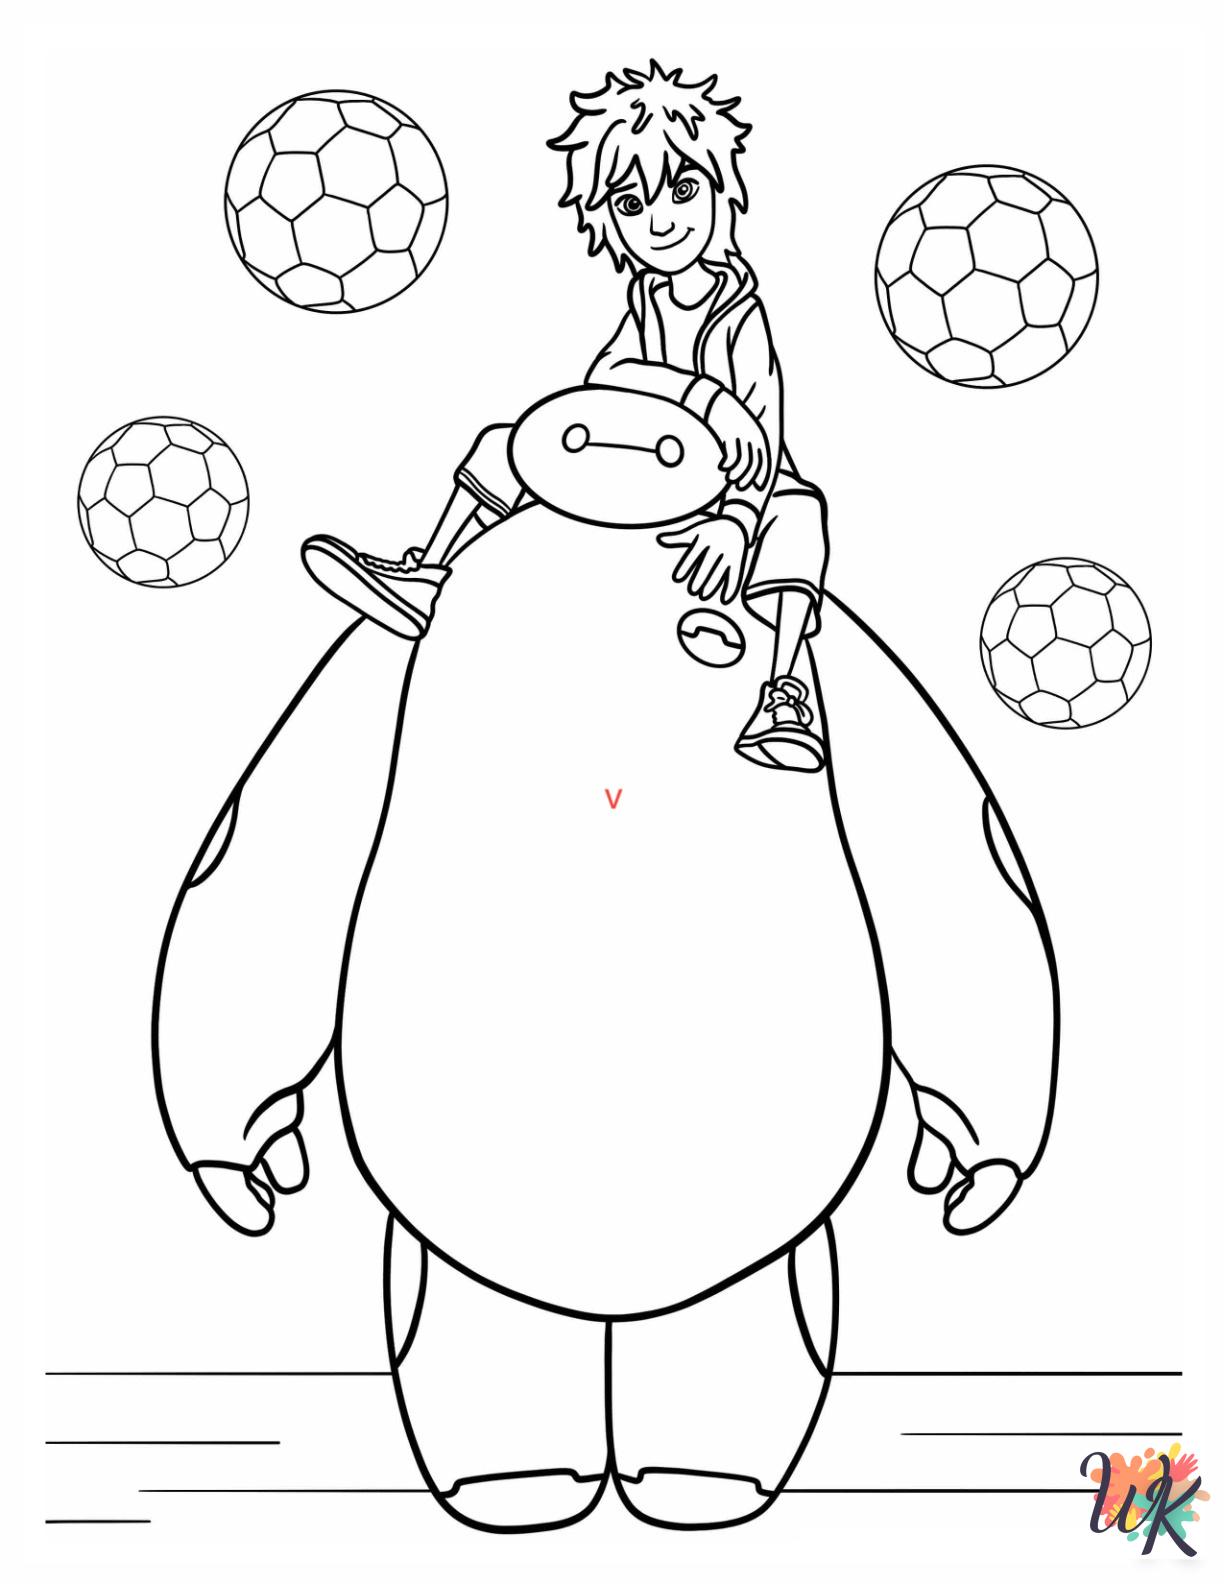 Big Hero 6 Coloring Pages 13